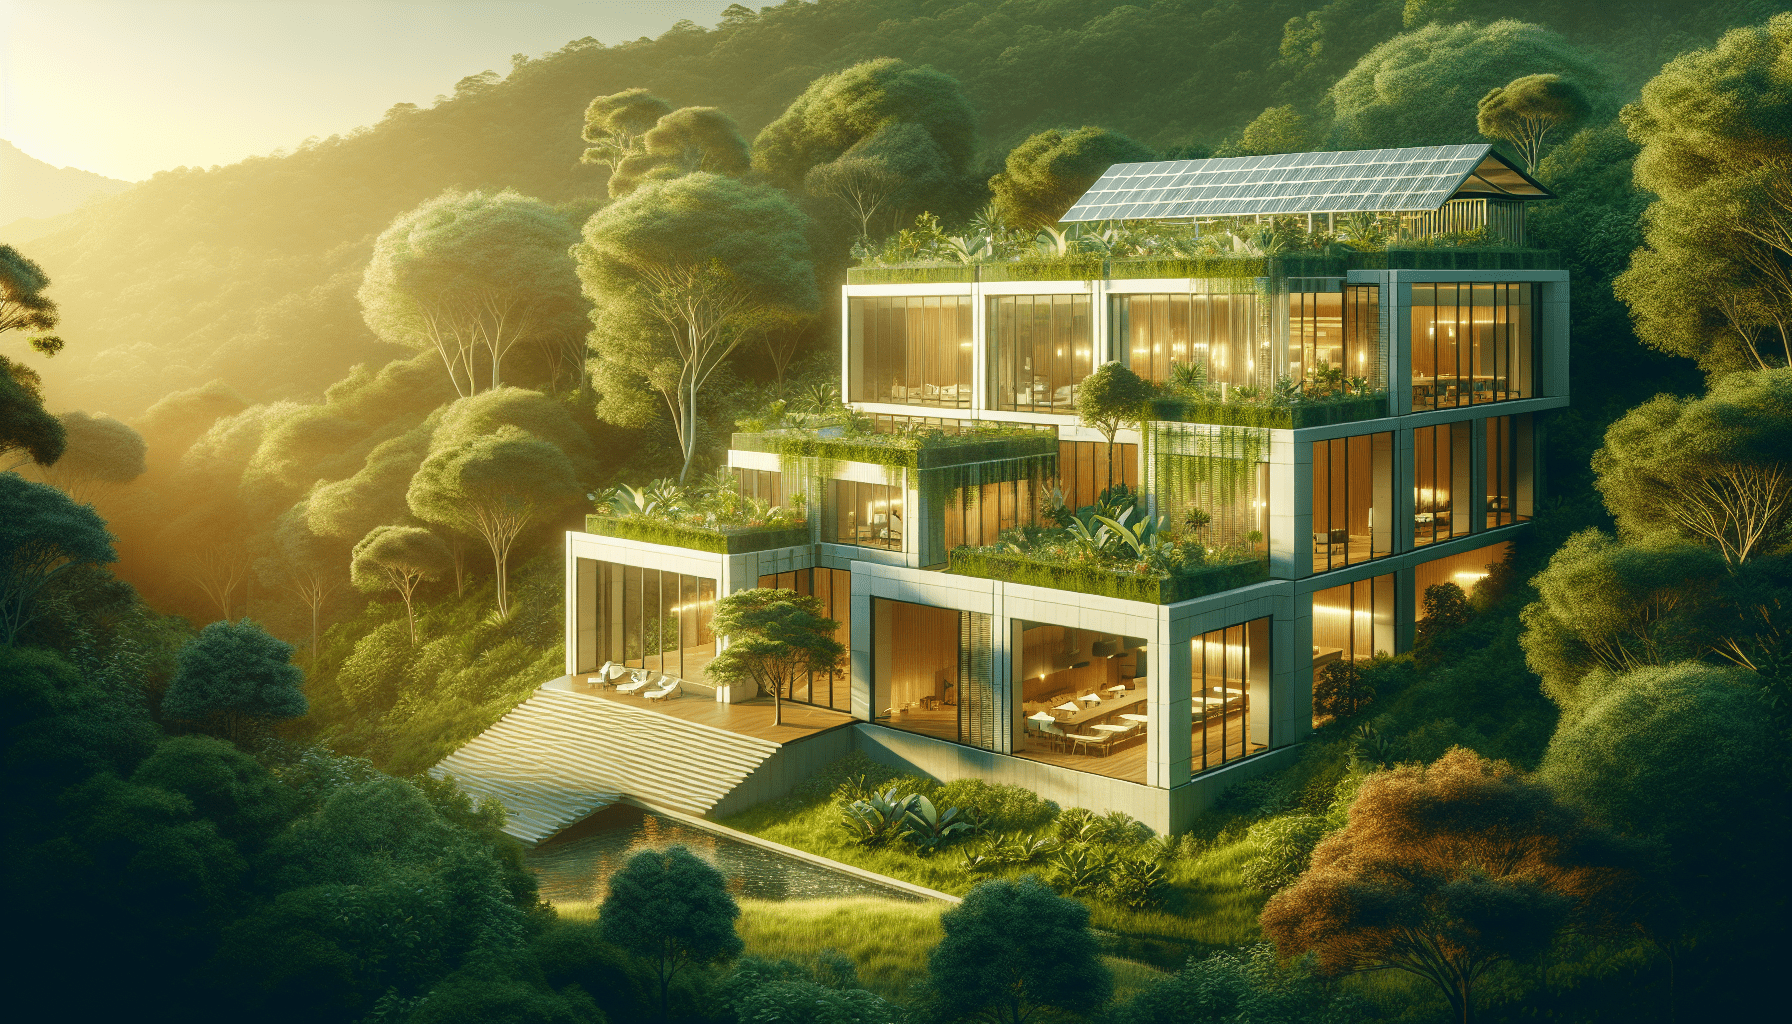 How Does Sustainable Architecture Help The Environment?